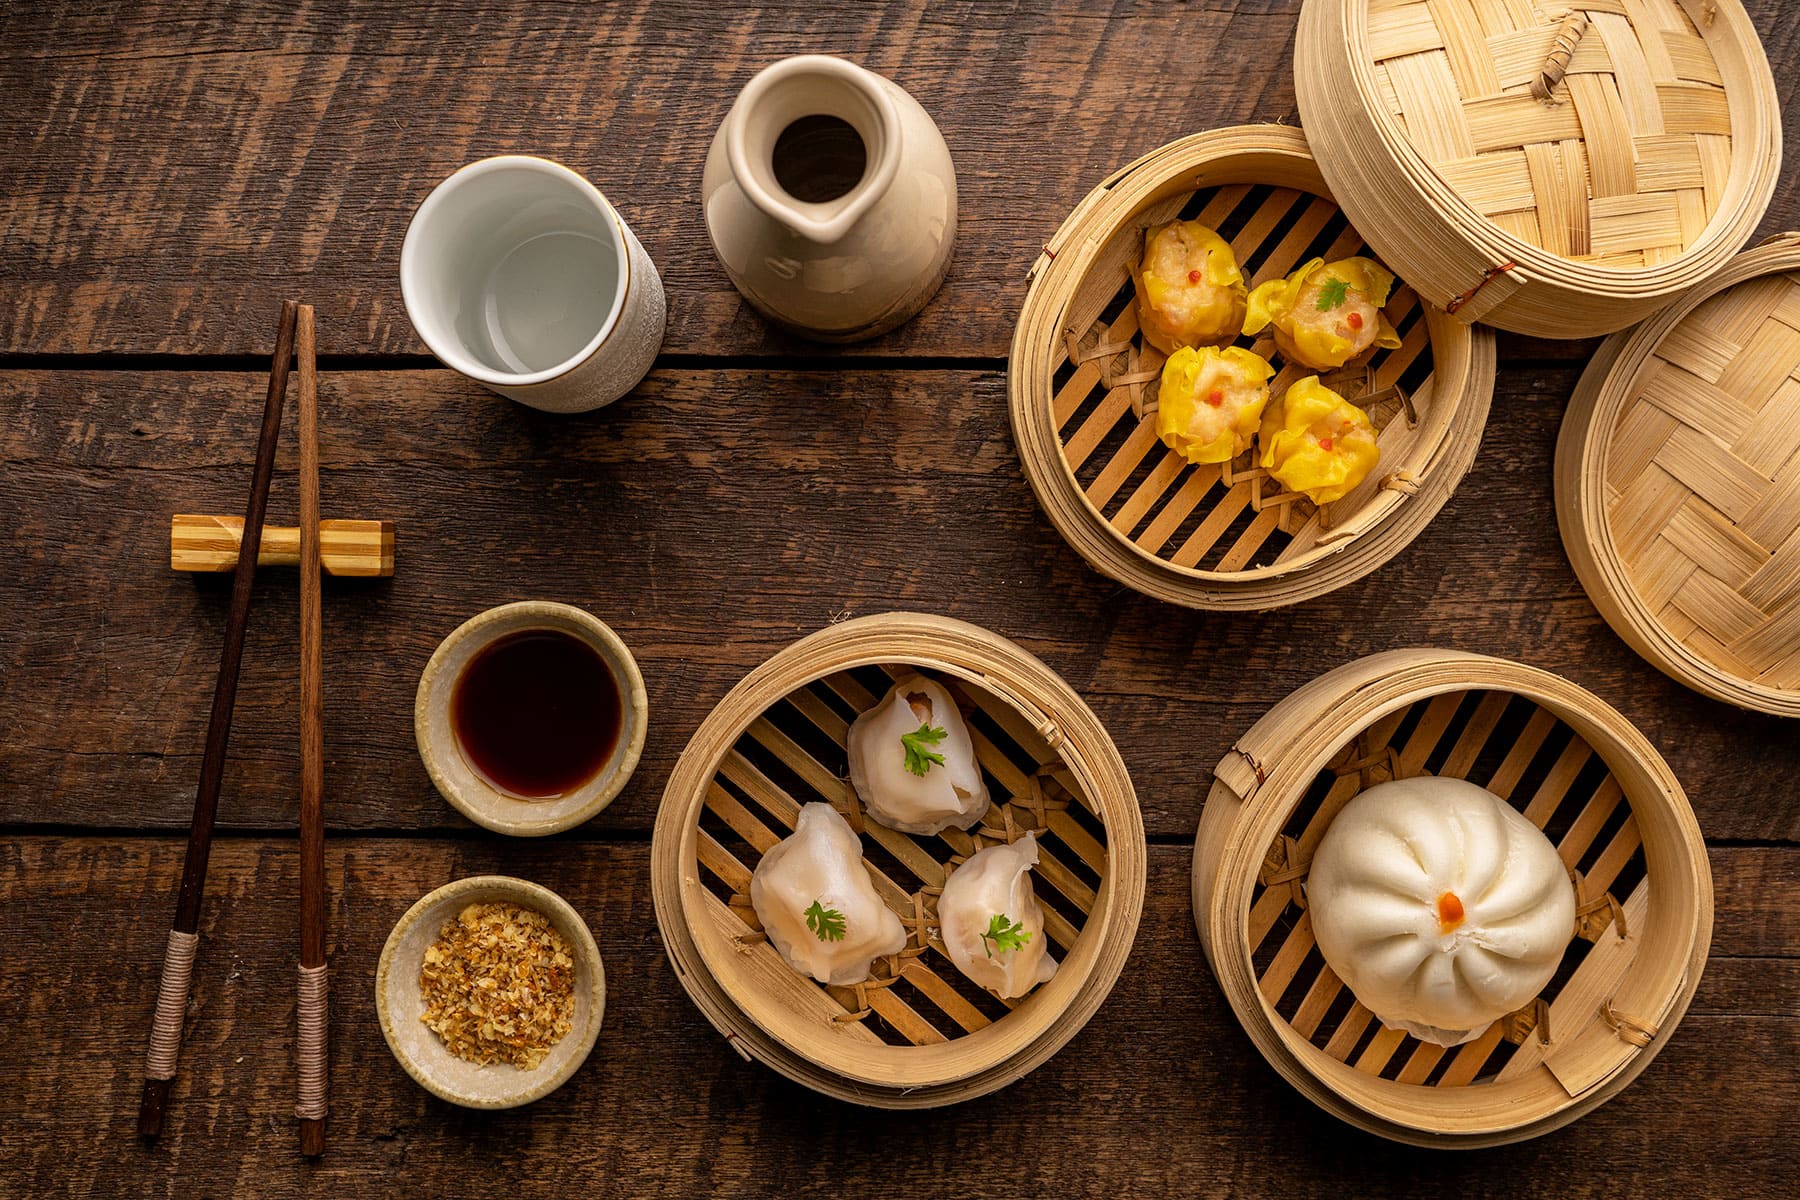 Bringing you the best of modern Cantonese cuisine, Oriental Sun excels in dim sum and house specialties like pan-fried foie gras with portobello mushroom and lobster steak with chardonnay cream sauce.